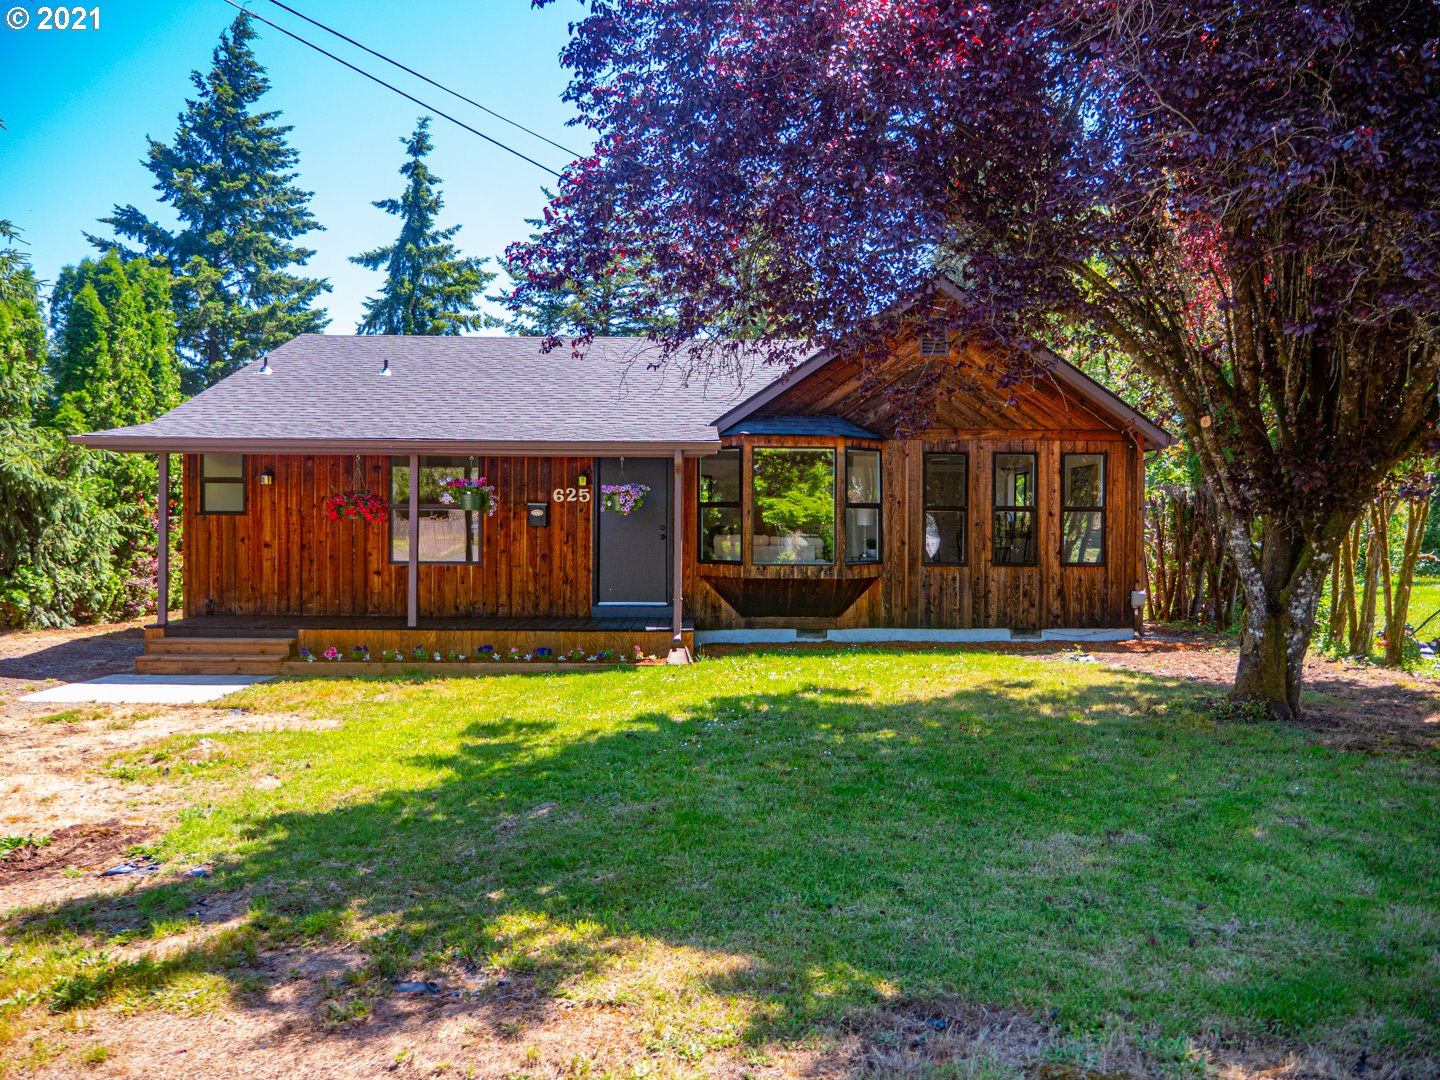 625 8TH AVE (1 of 32)